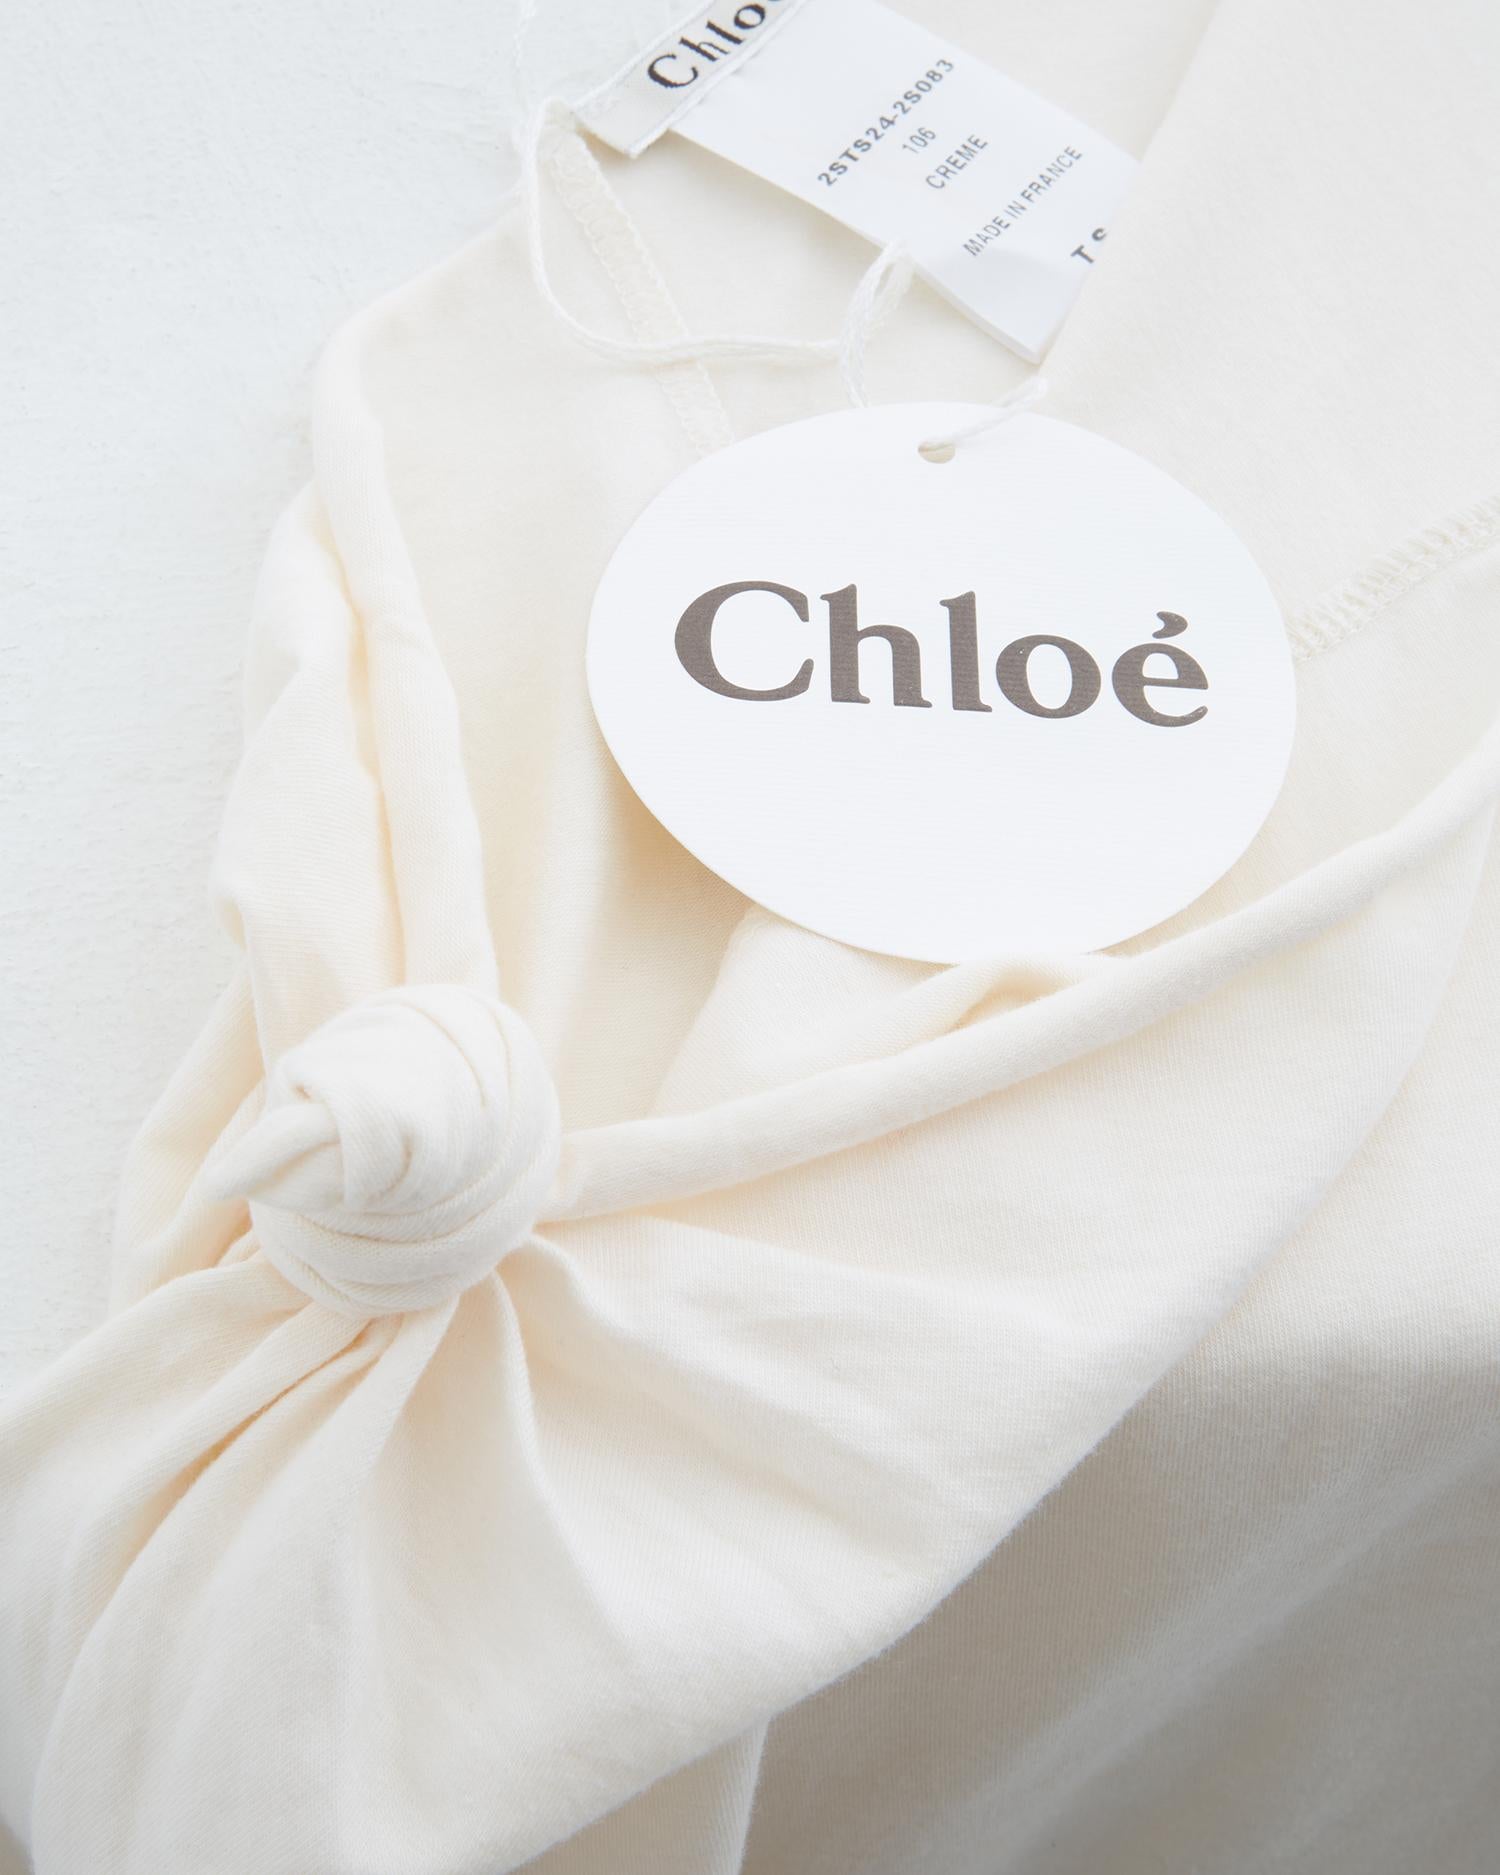 Chloé by Phoebe Philo sightly off-white backless top, ss 2002 2